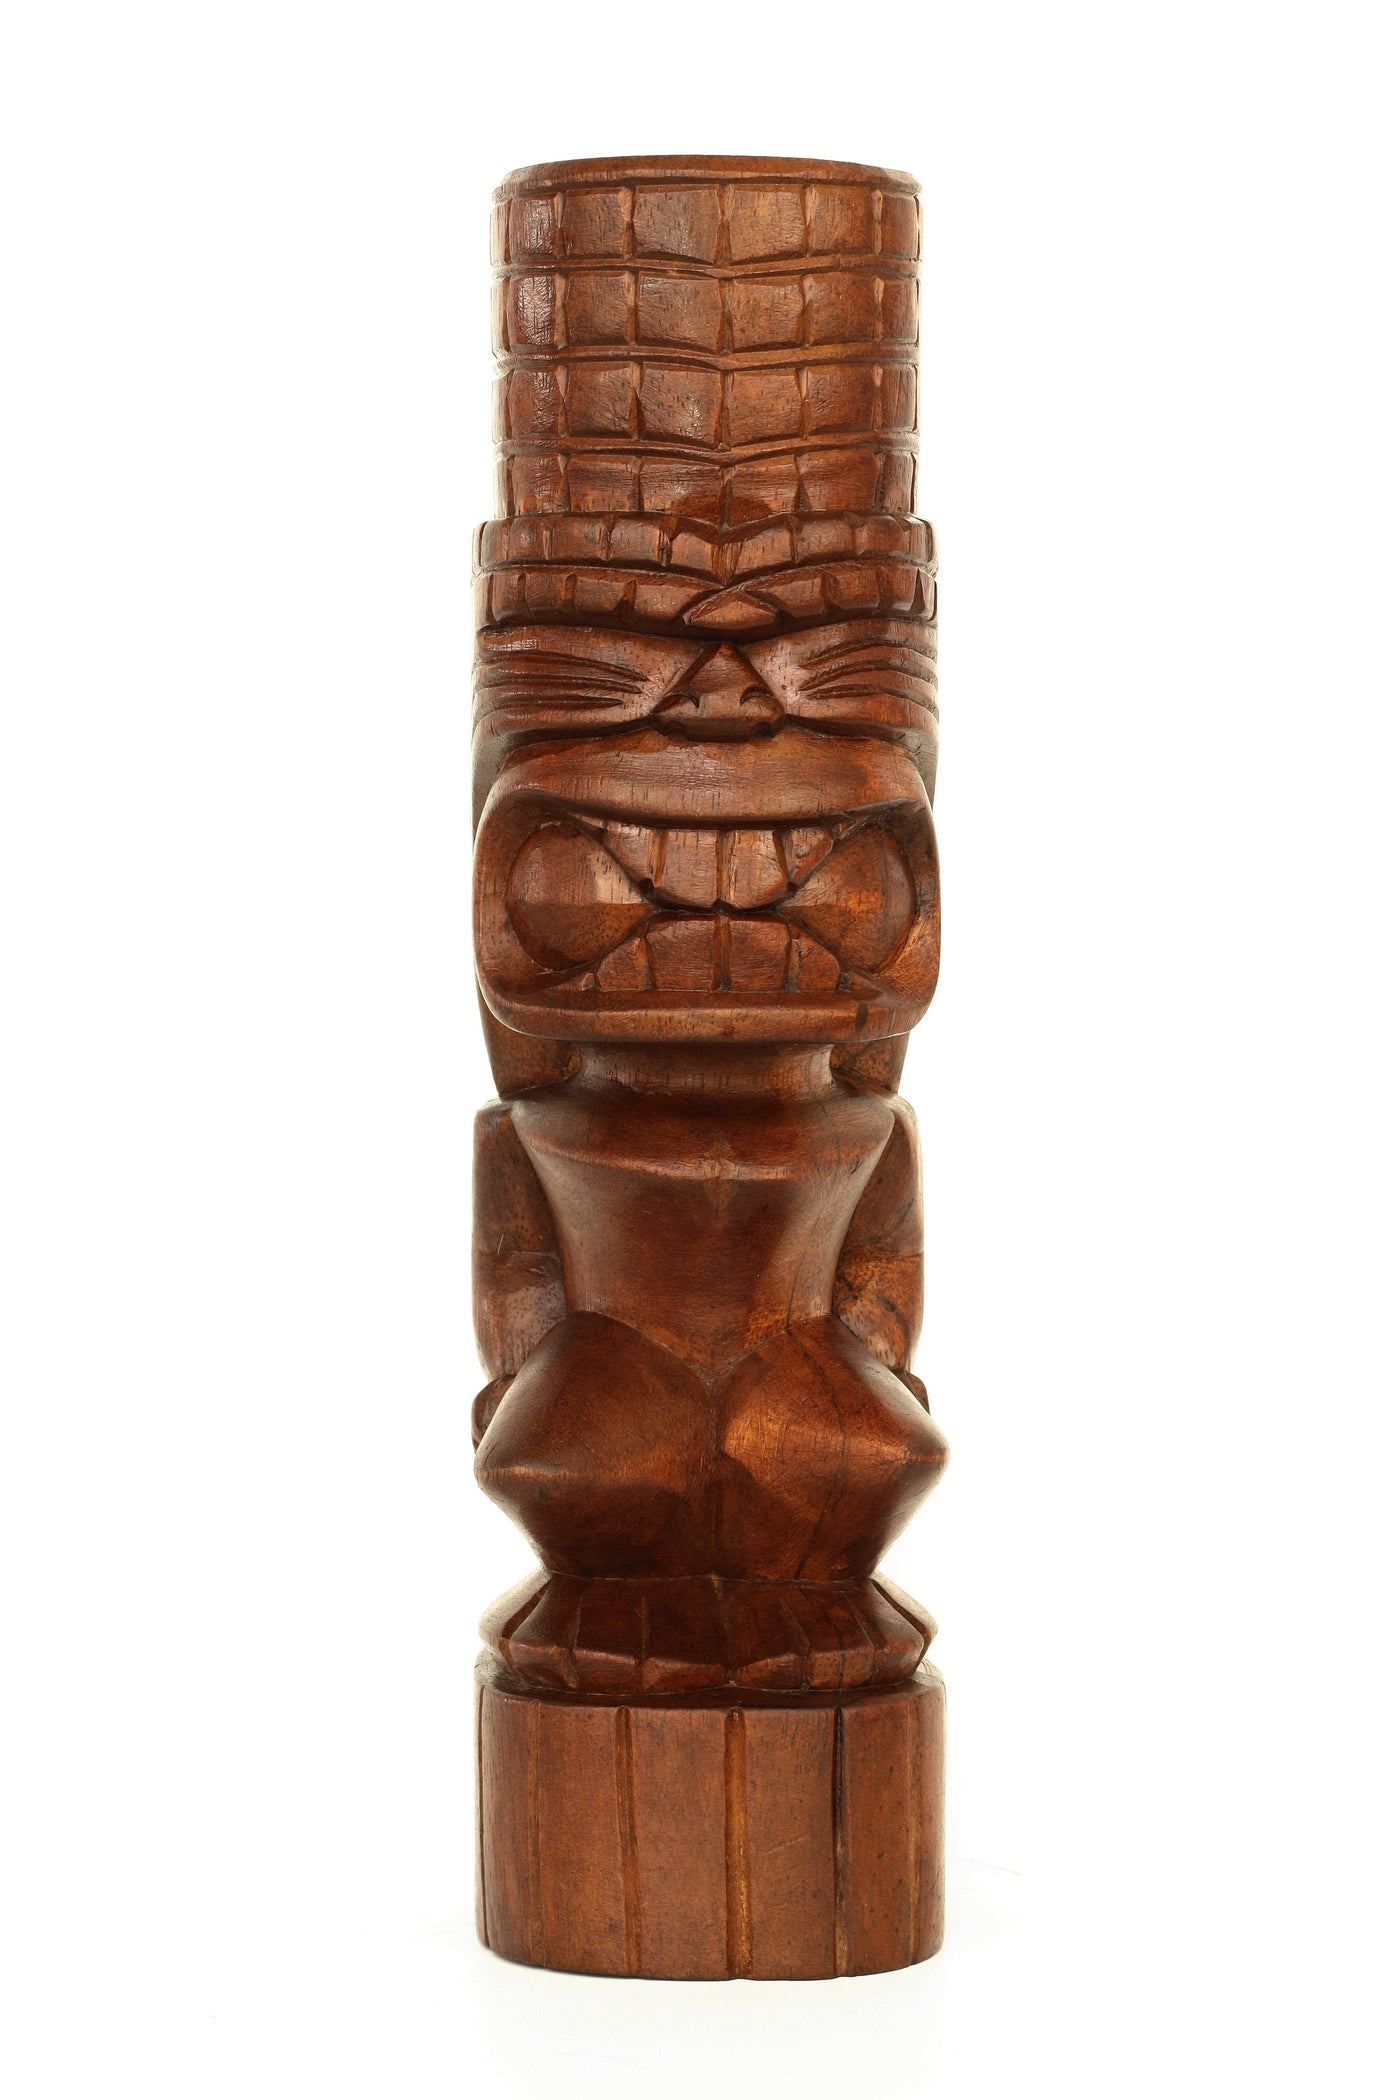 Handmade Wooden Primitive Big Mouth Tribal Statue Sculpture Tiki Bar Handcrafted Unique Gift Art Decorative Home Decor Accent Figurine Decoration Artwork Hand Carved Wood